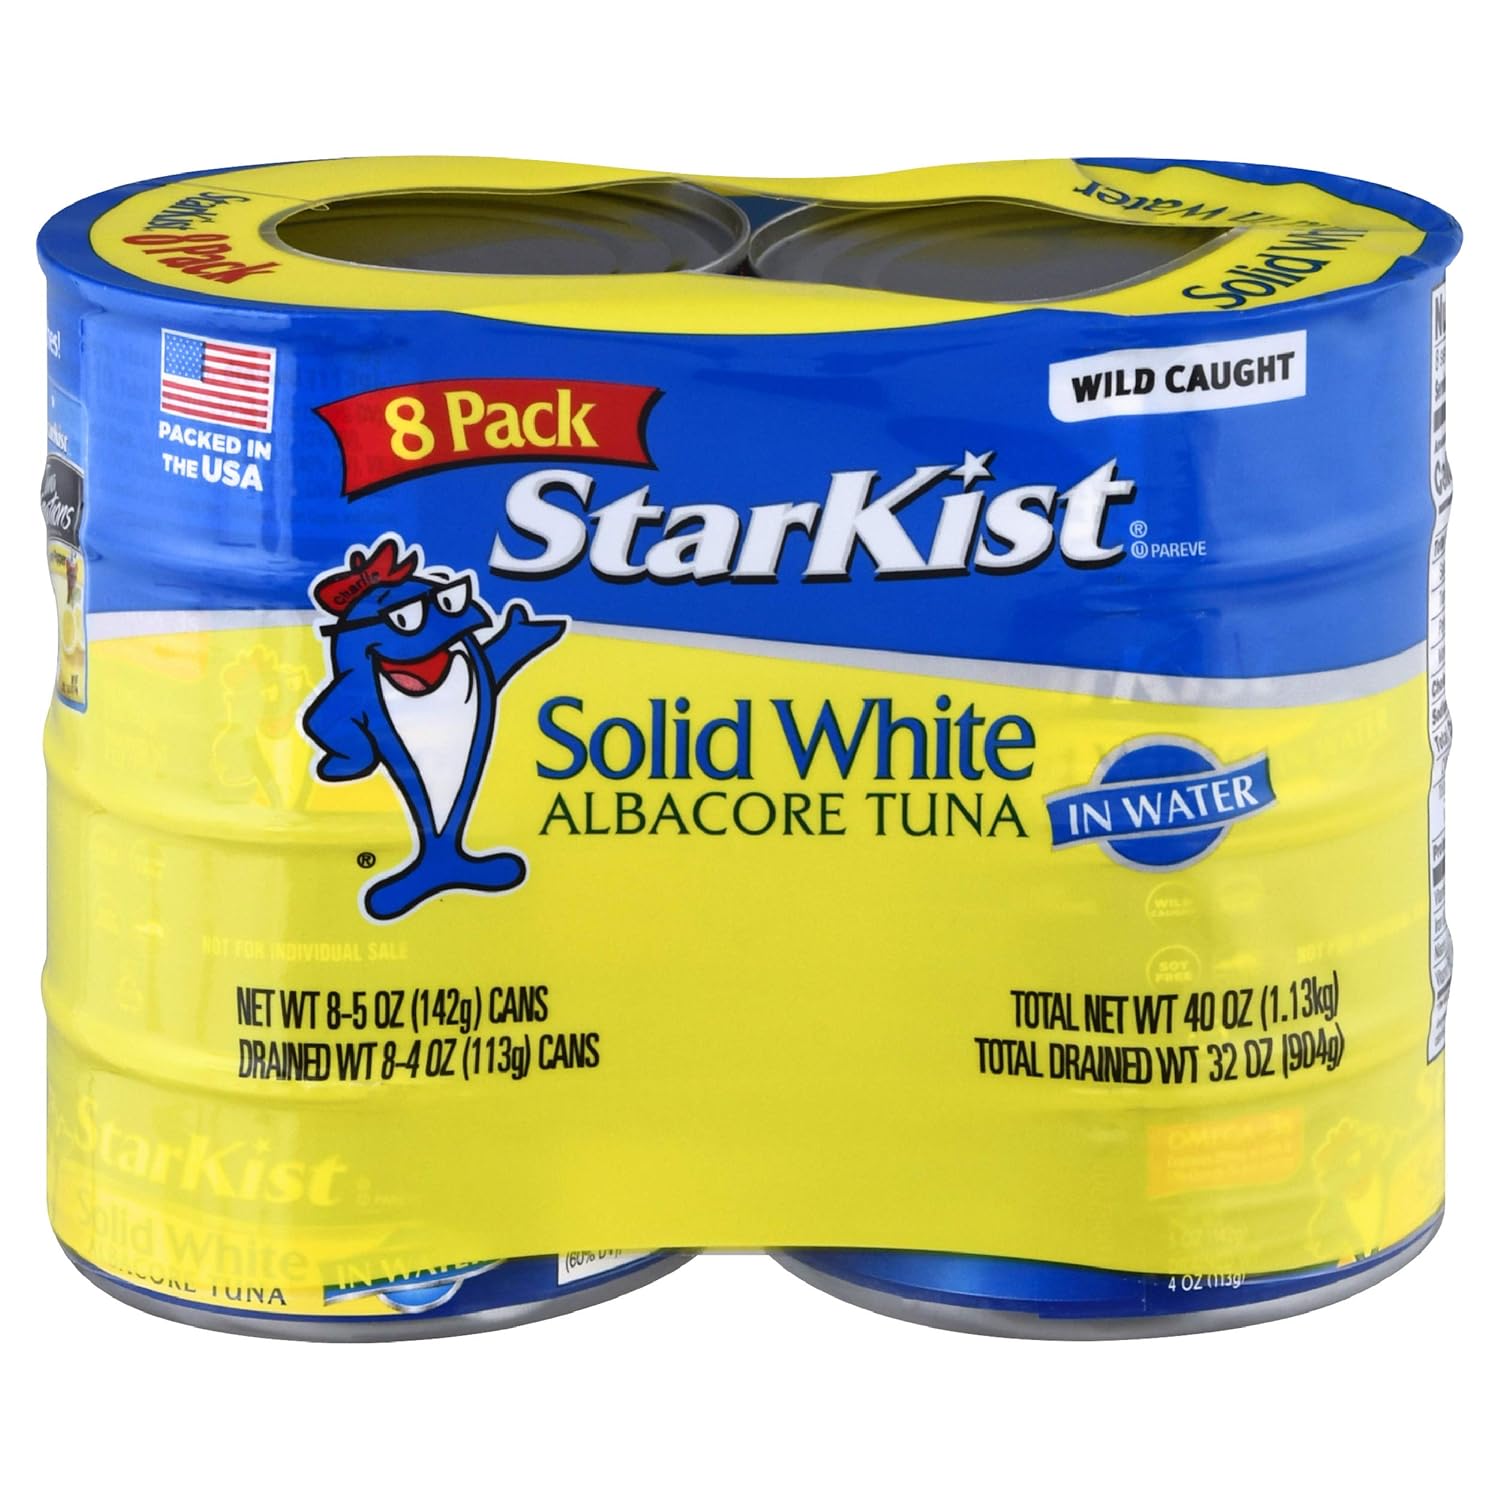 StarKist Solid White Albacore Tuna in Water, 5 oz. Can, Pack of 8